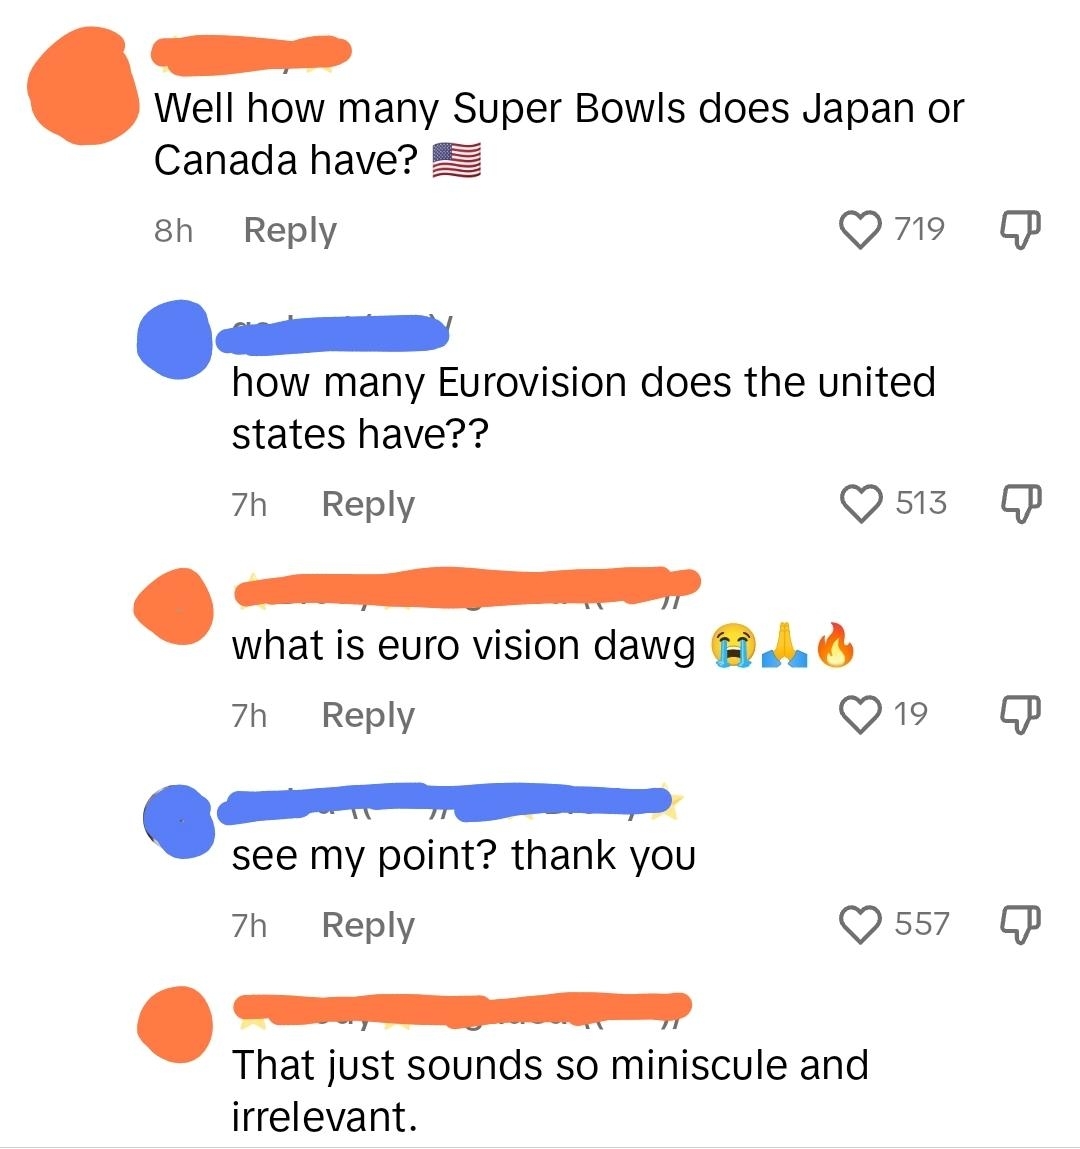 &quot;How many Super Bowls does Japan or Canada have?&quot; &quot;How many Eurovision does the United States have?&quot; &quot;What is Euro vision dawg&quot; &quot;See my point? Thank you&quot; &quot;That just sounds so miniscule and irrelevent&quot;